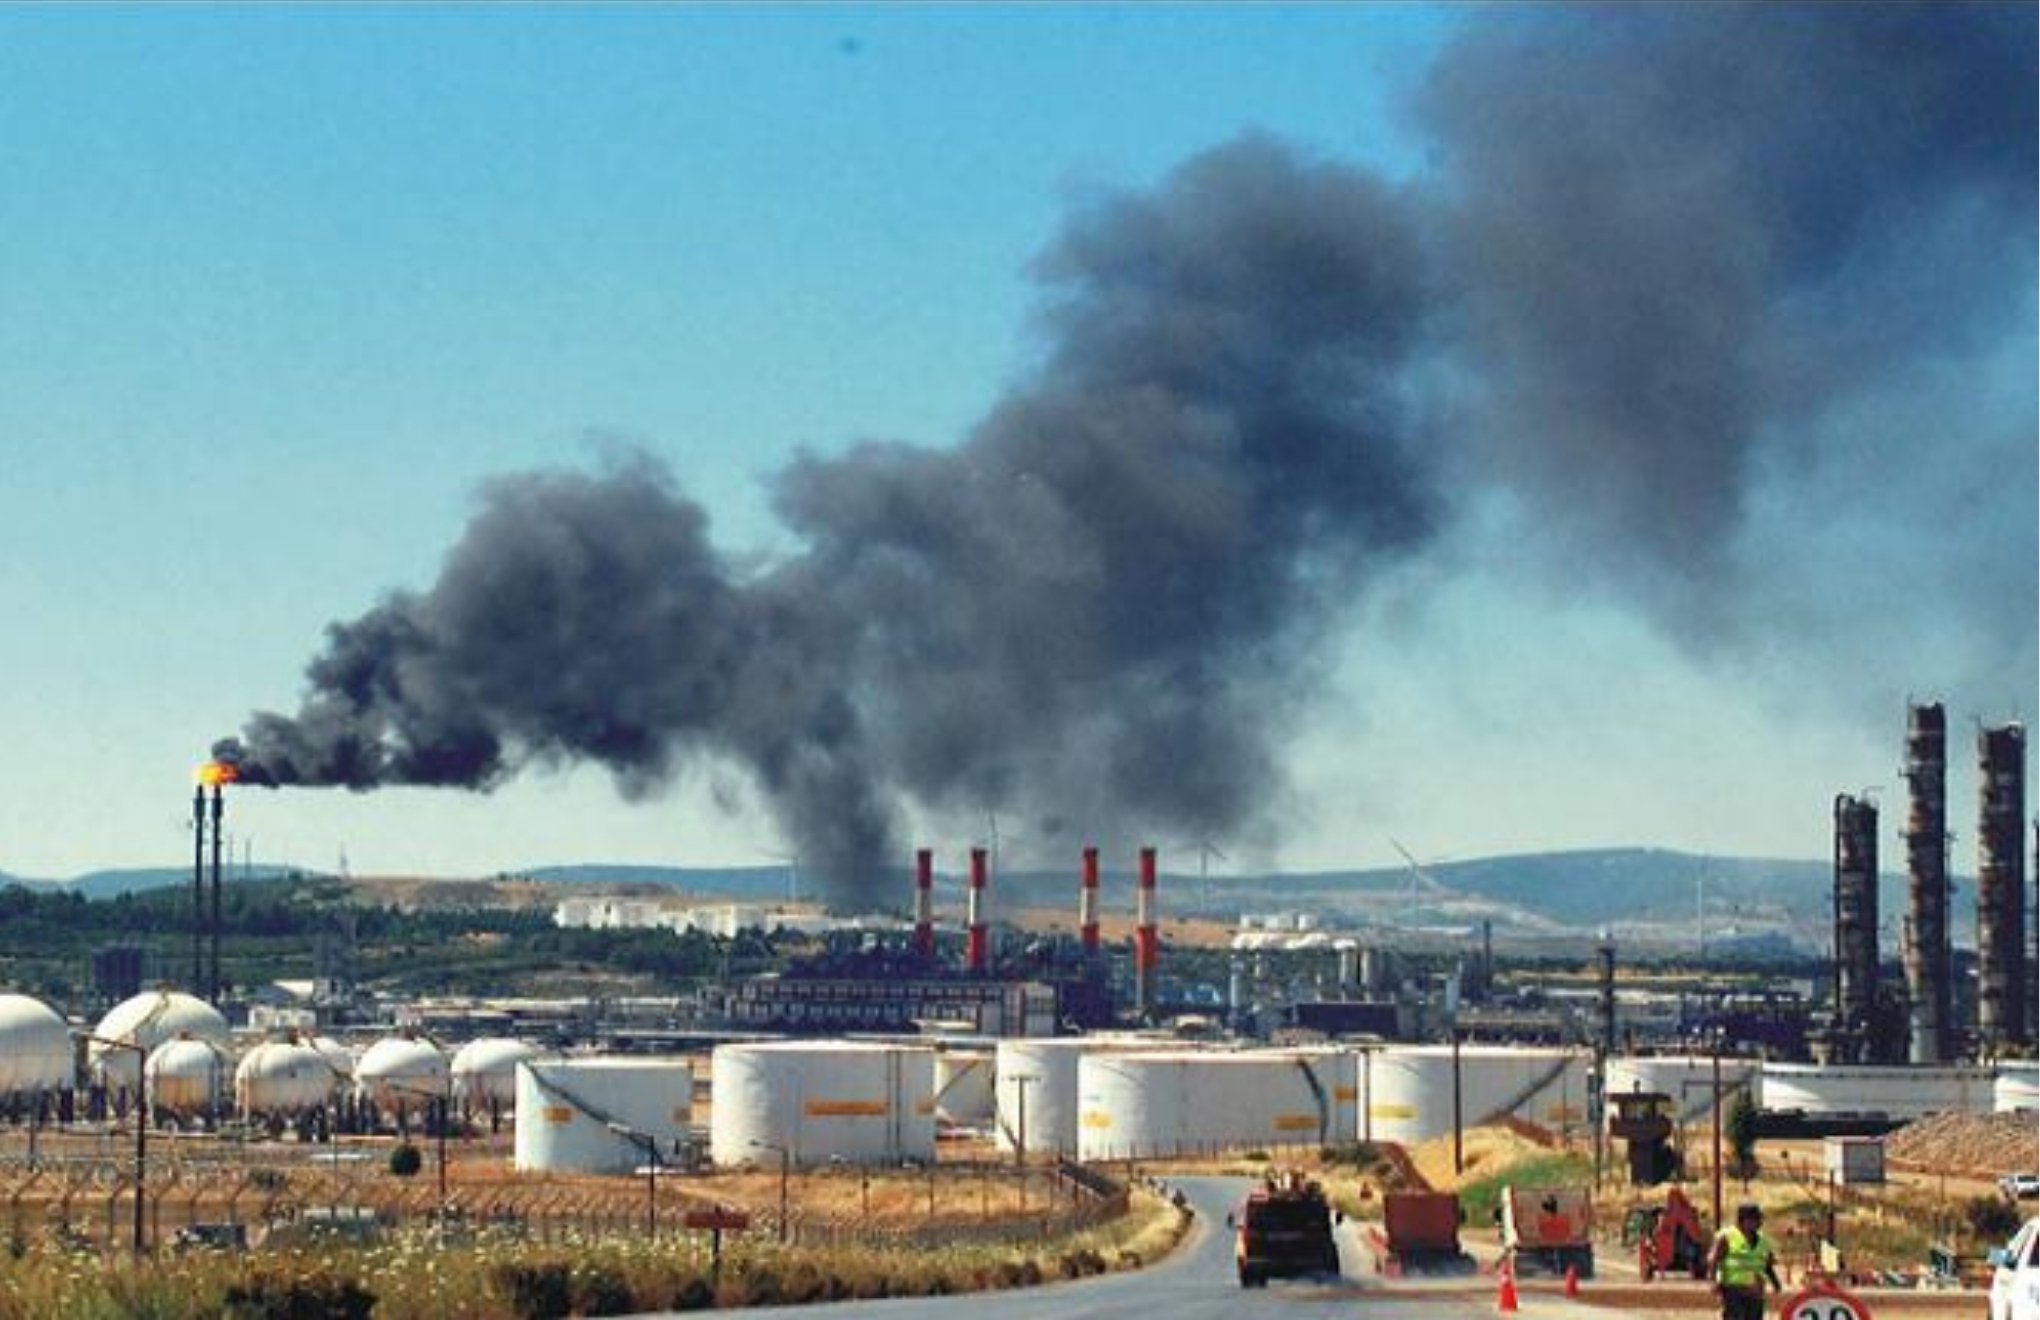 ‘Air quality data on İzmir’s industrial sites not shared for 5 years’